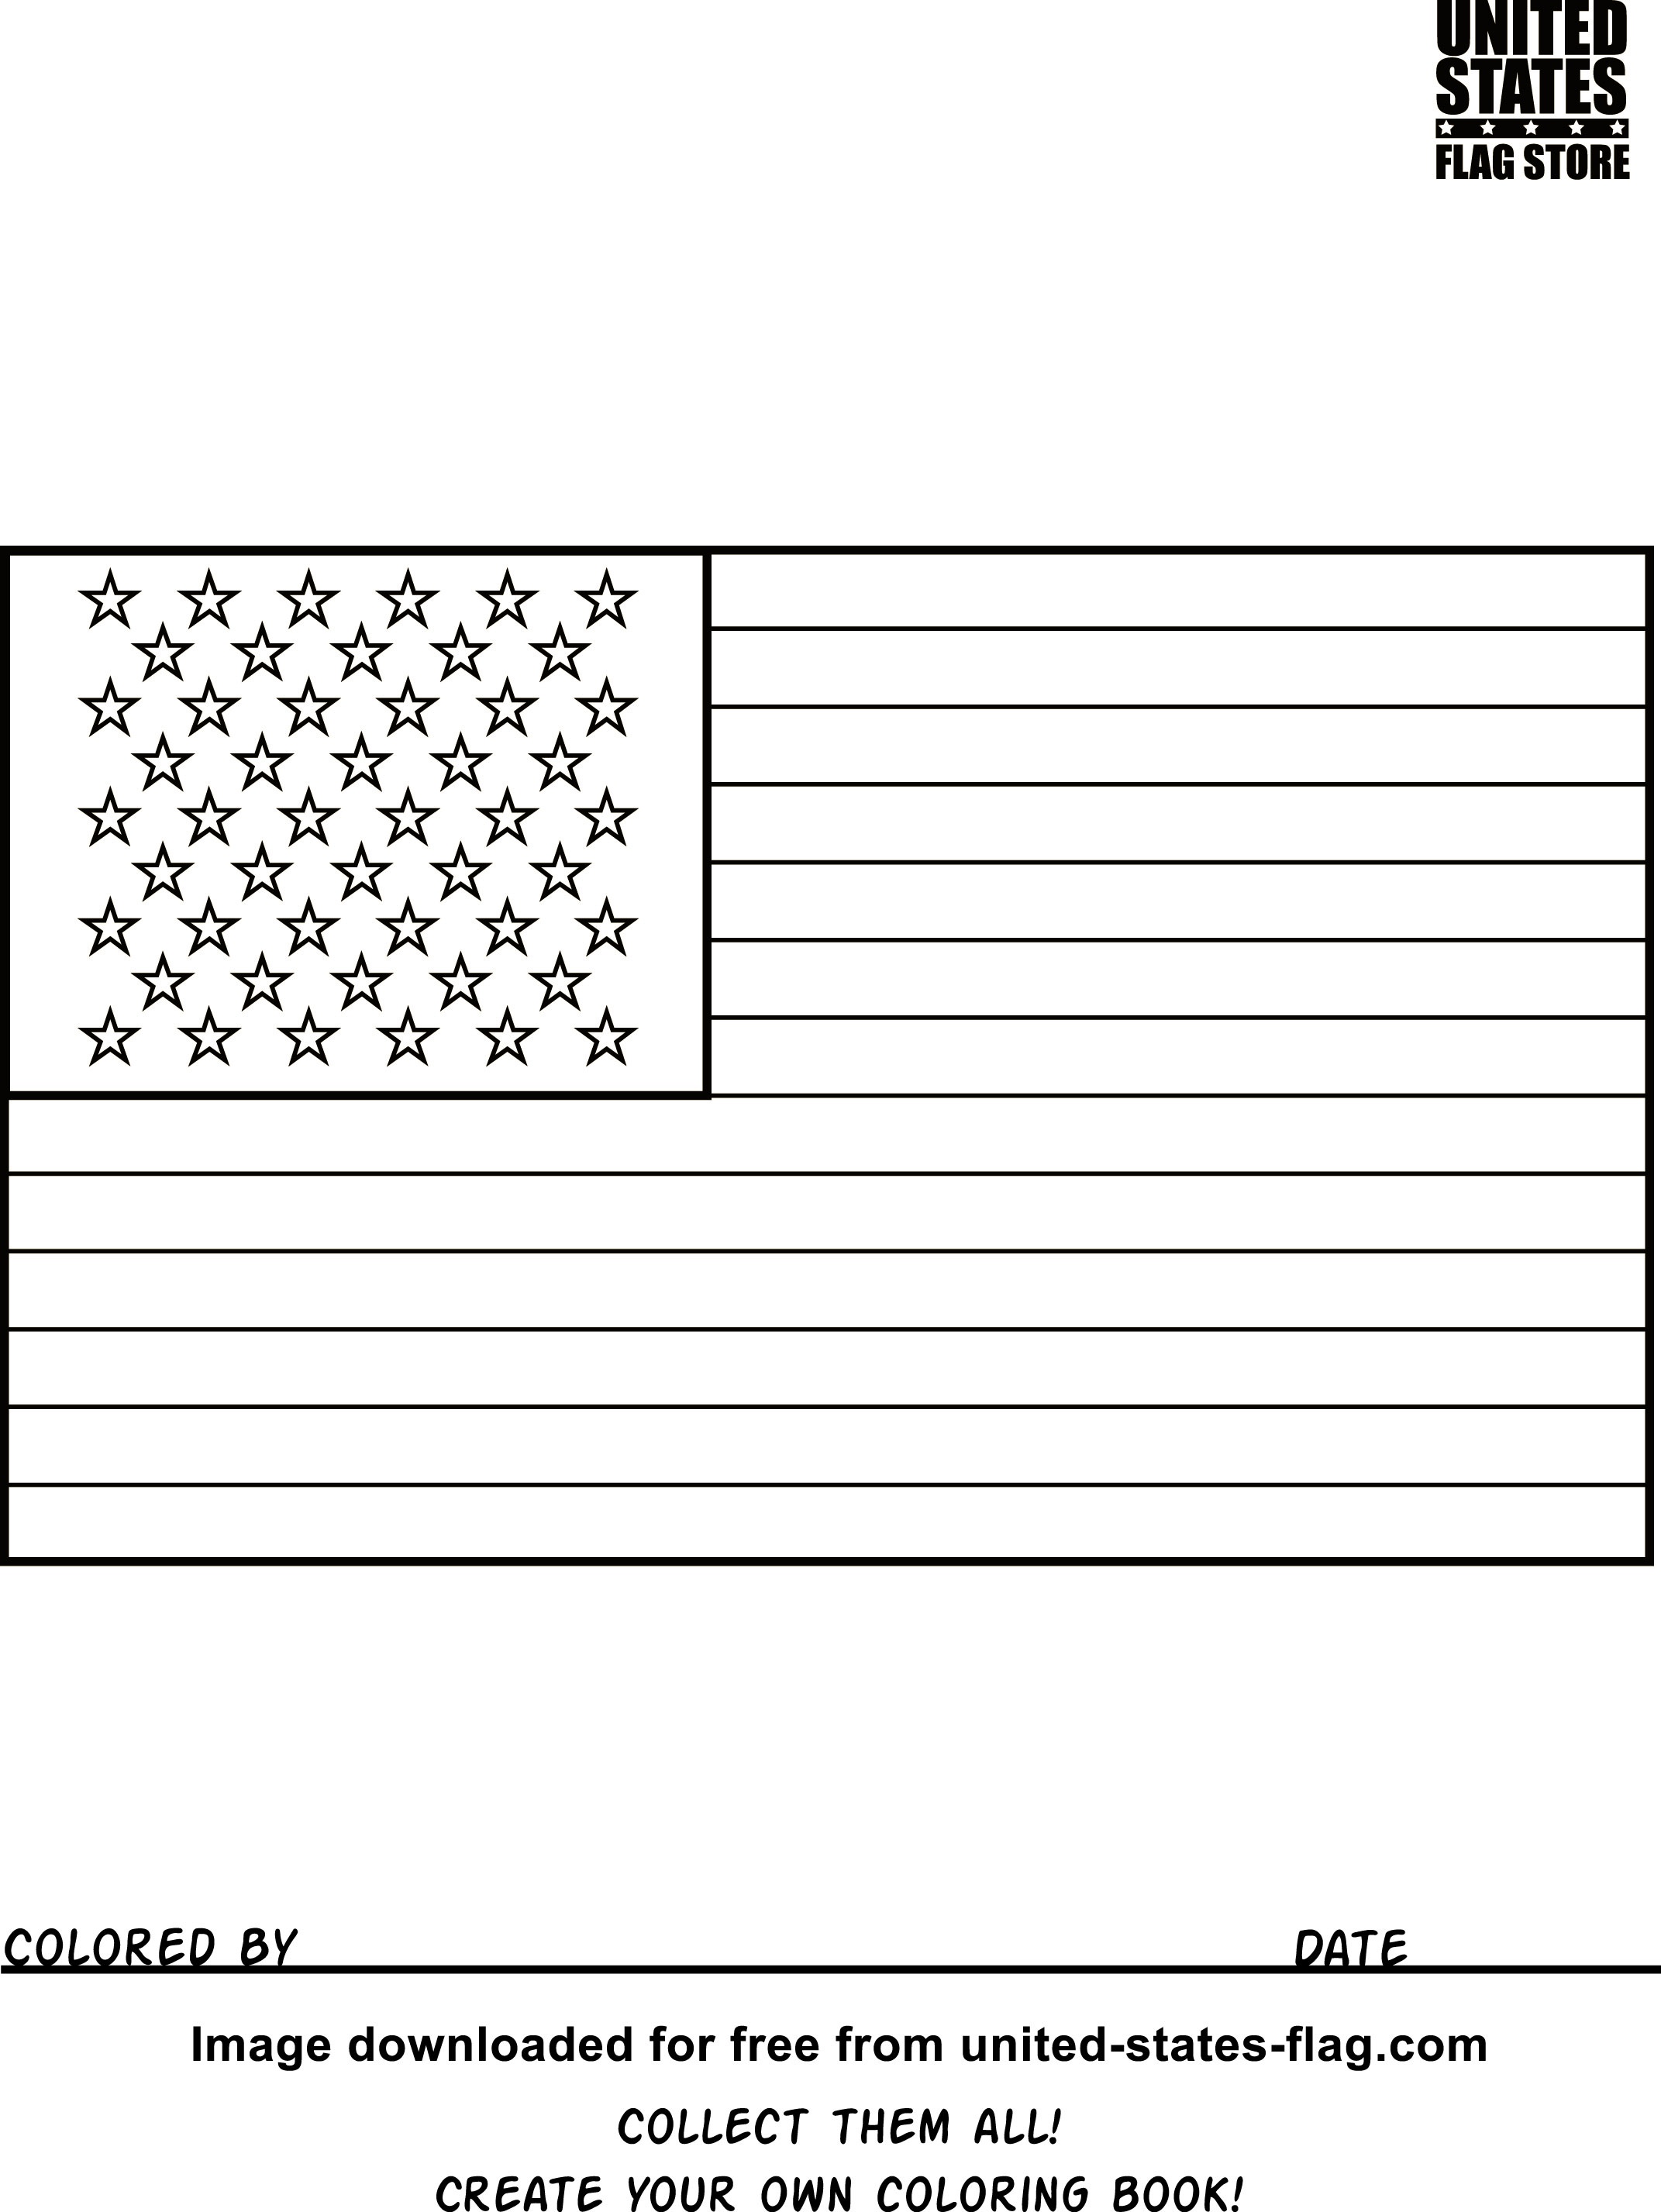 Free American Flag Coloring Pages - Free Printable American Flag Coloring Page